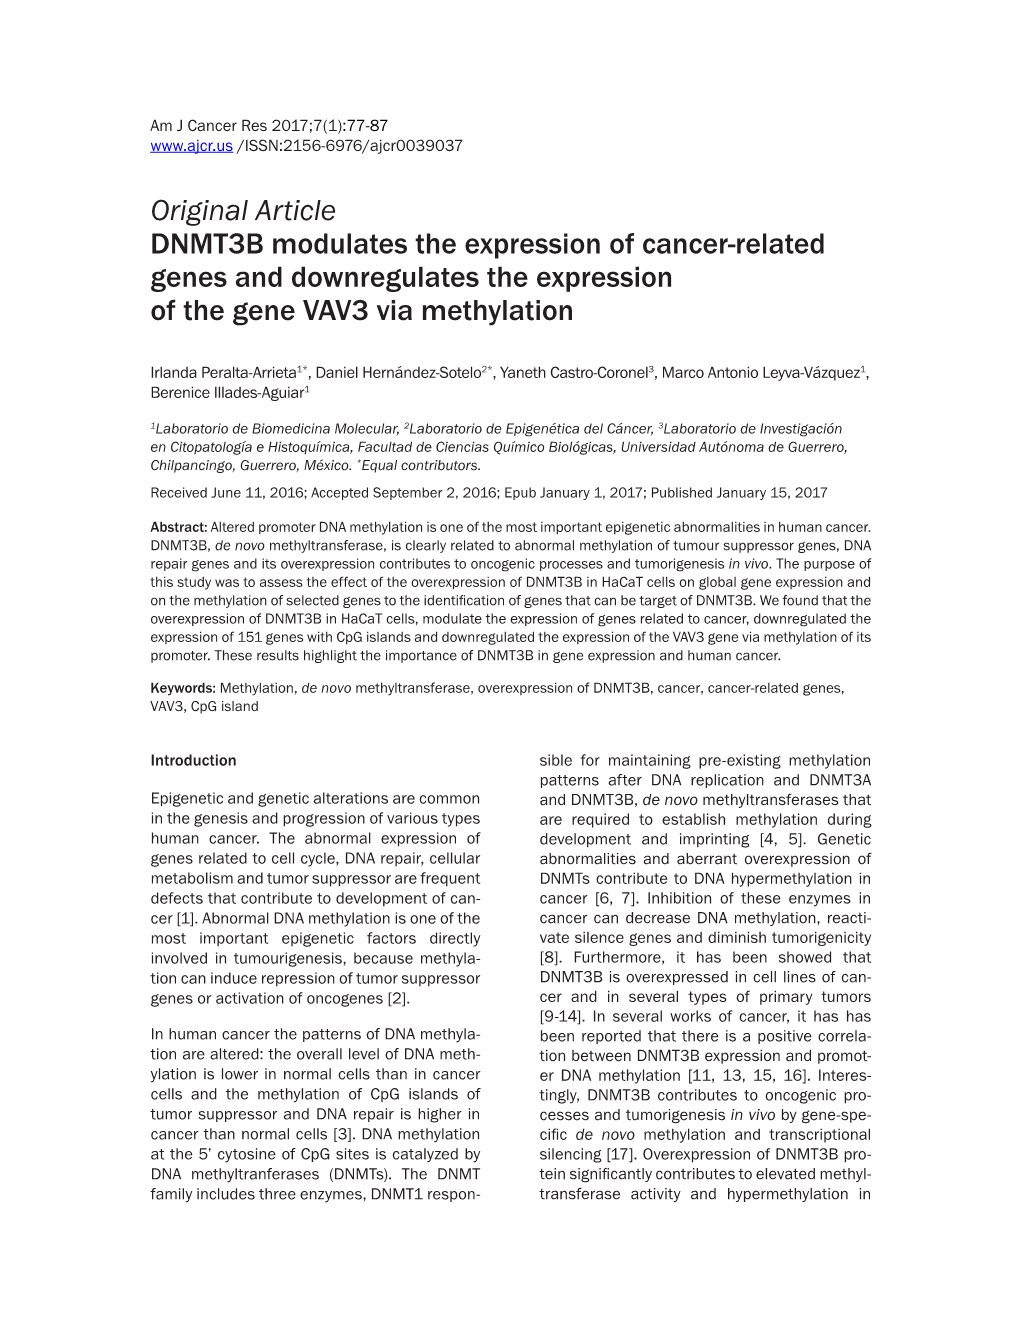 Original Article DNMT3B Modulates the Expression of Cancer-Related Genes and Downregulates the Expression of the Gene VAV3 Via Methylation